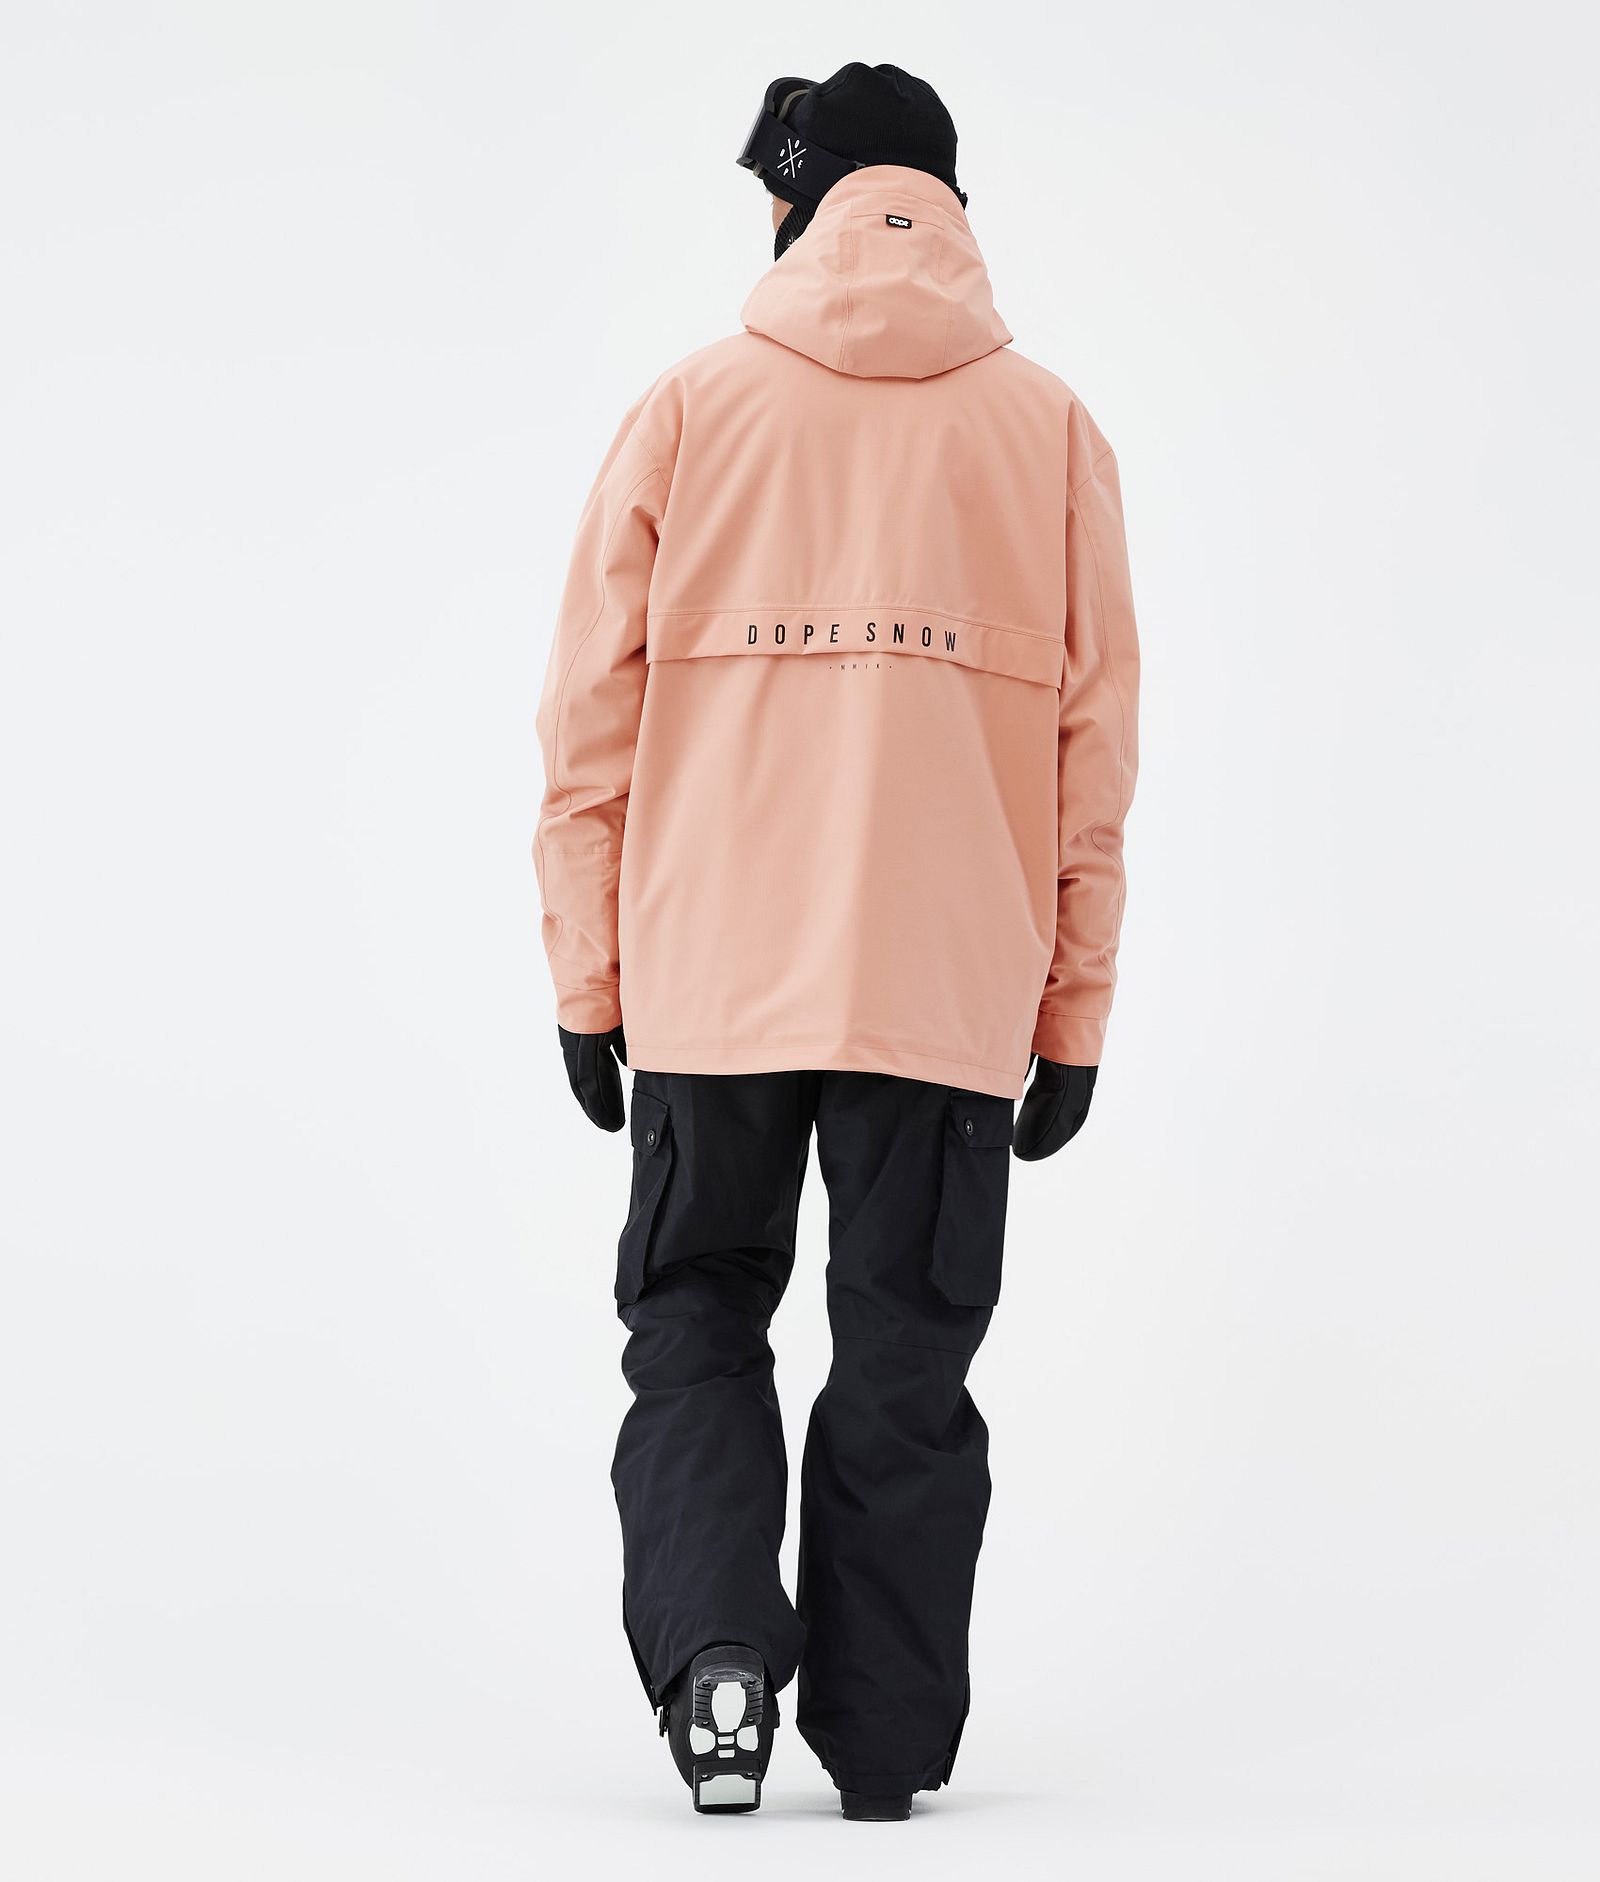 Dope Legacy Skidoutfit Herre Faded Peach/Black